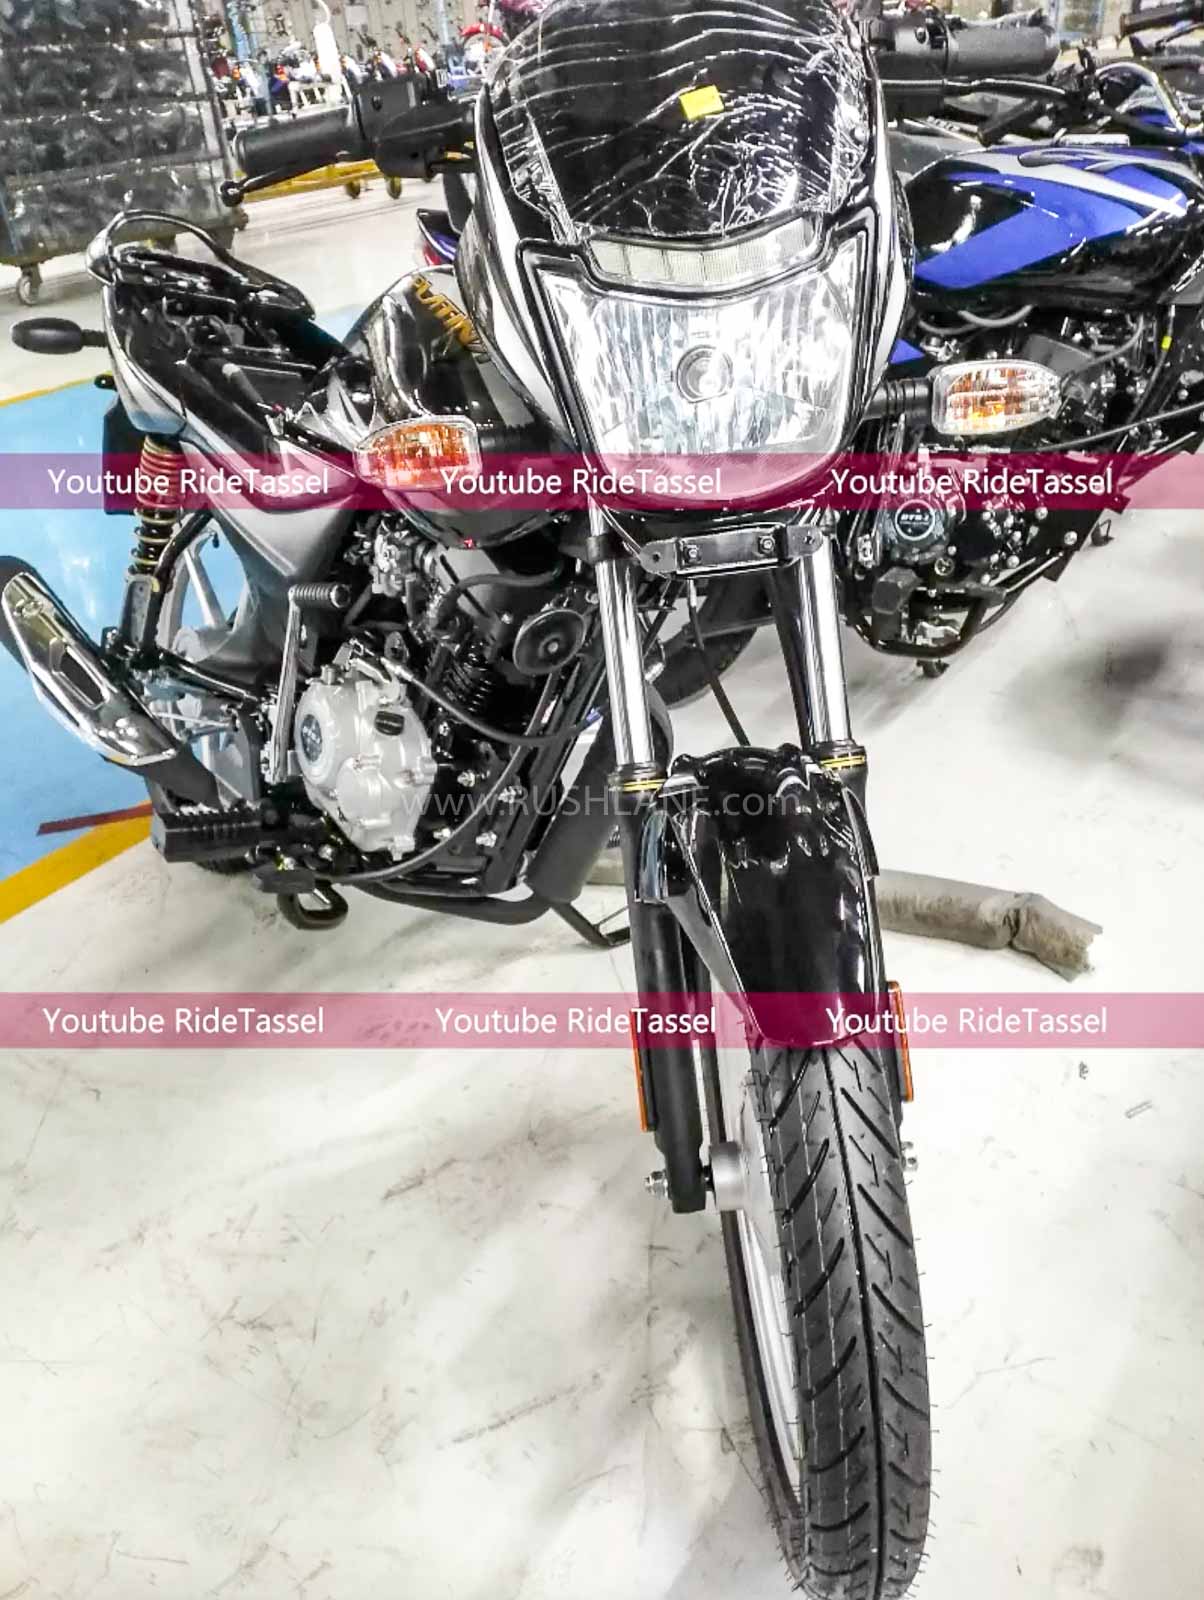 Bajaj Platina Bs6 Launch Price Rs 47k Two Variants 13 New Changes